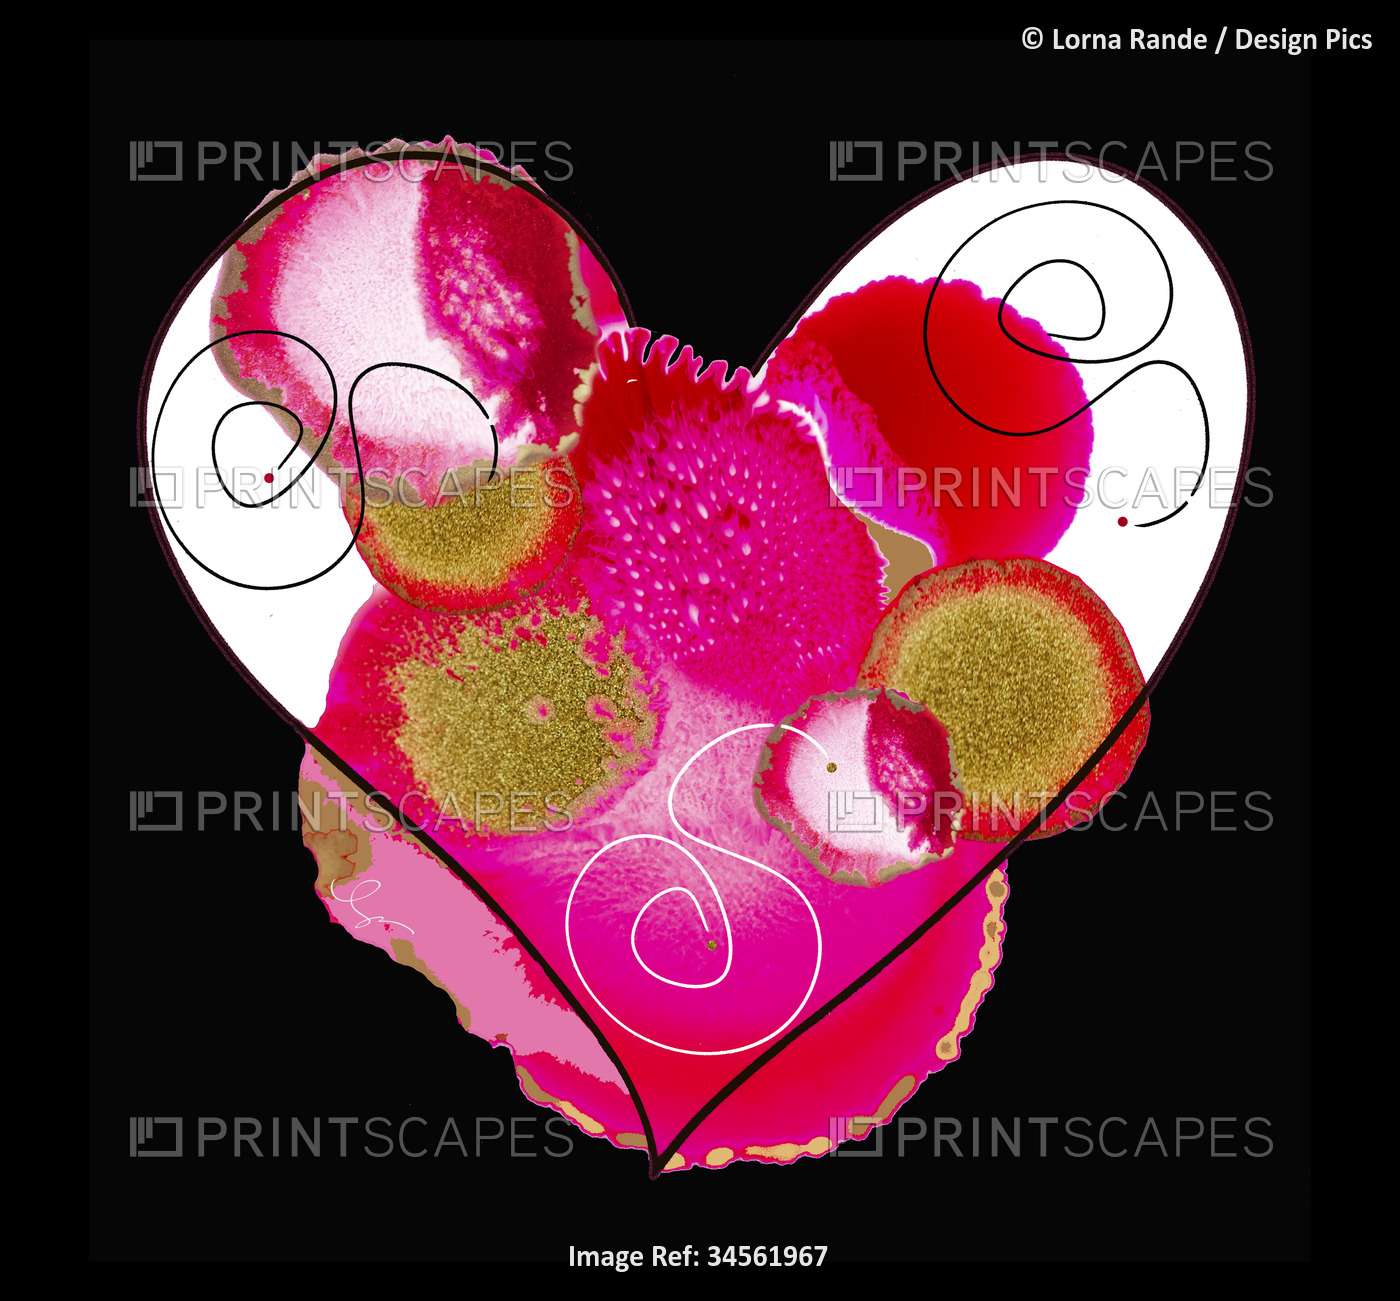 Ink art, Ink Hearts, with pink, red and gold floral influences; Artwork